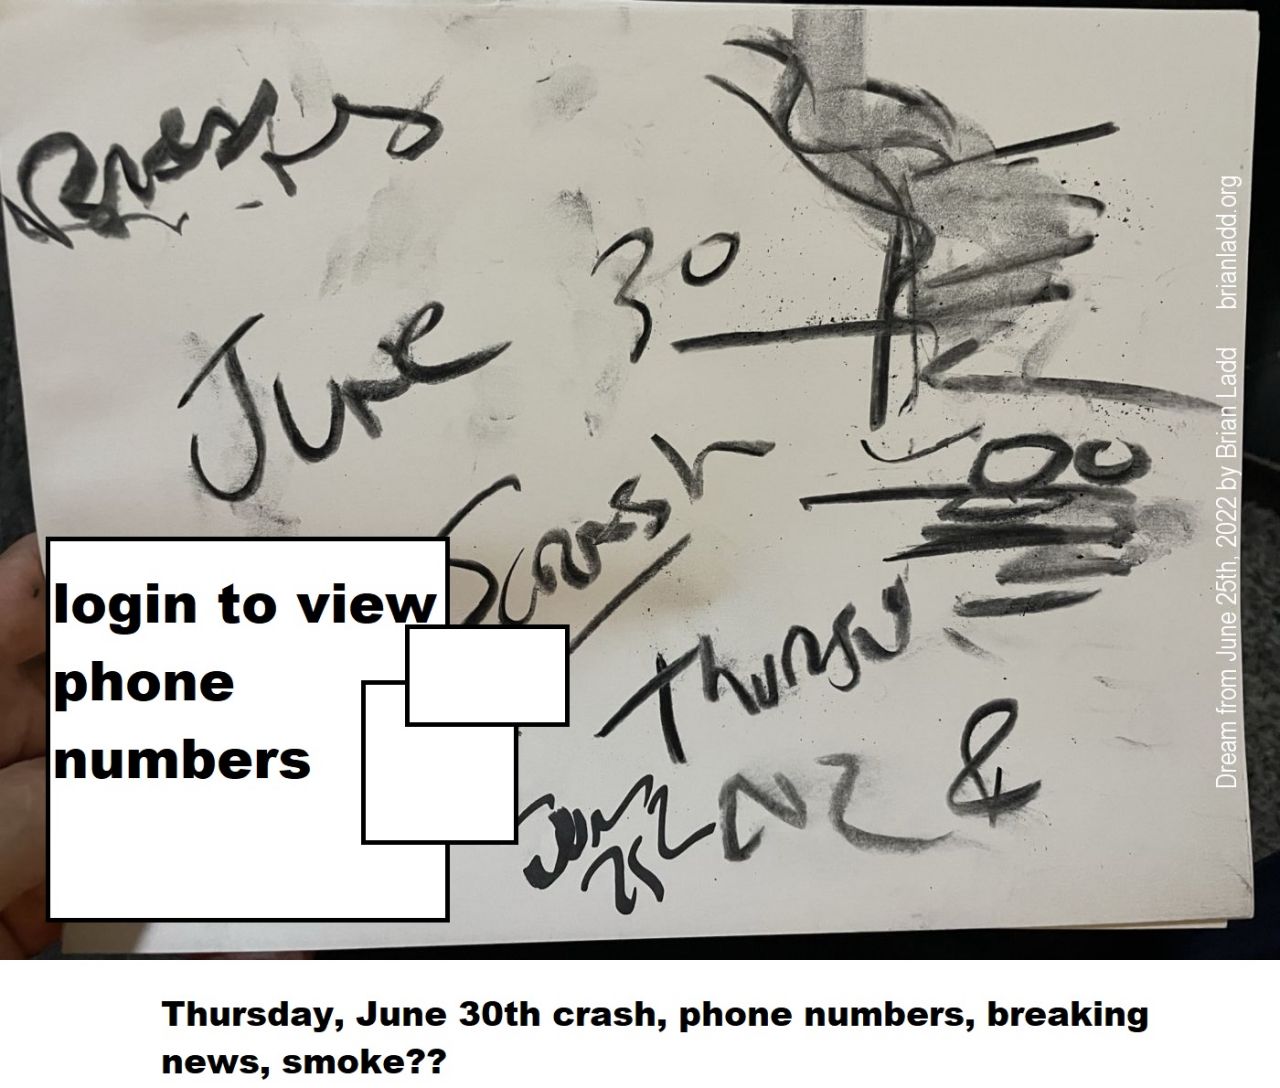 25 June 2022 2   Thursday, June 30th crash, phone numbers, breaking news, smoke??  (note: if the thumbnail images are blurry, you need to login and click on the image) 
Thursday, June 30th crash, phone numbers, breaking news, smoke??  (note: if the thumbnail images are blurry, you need to login and click on the image) 
